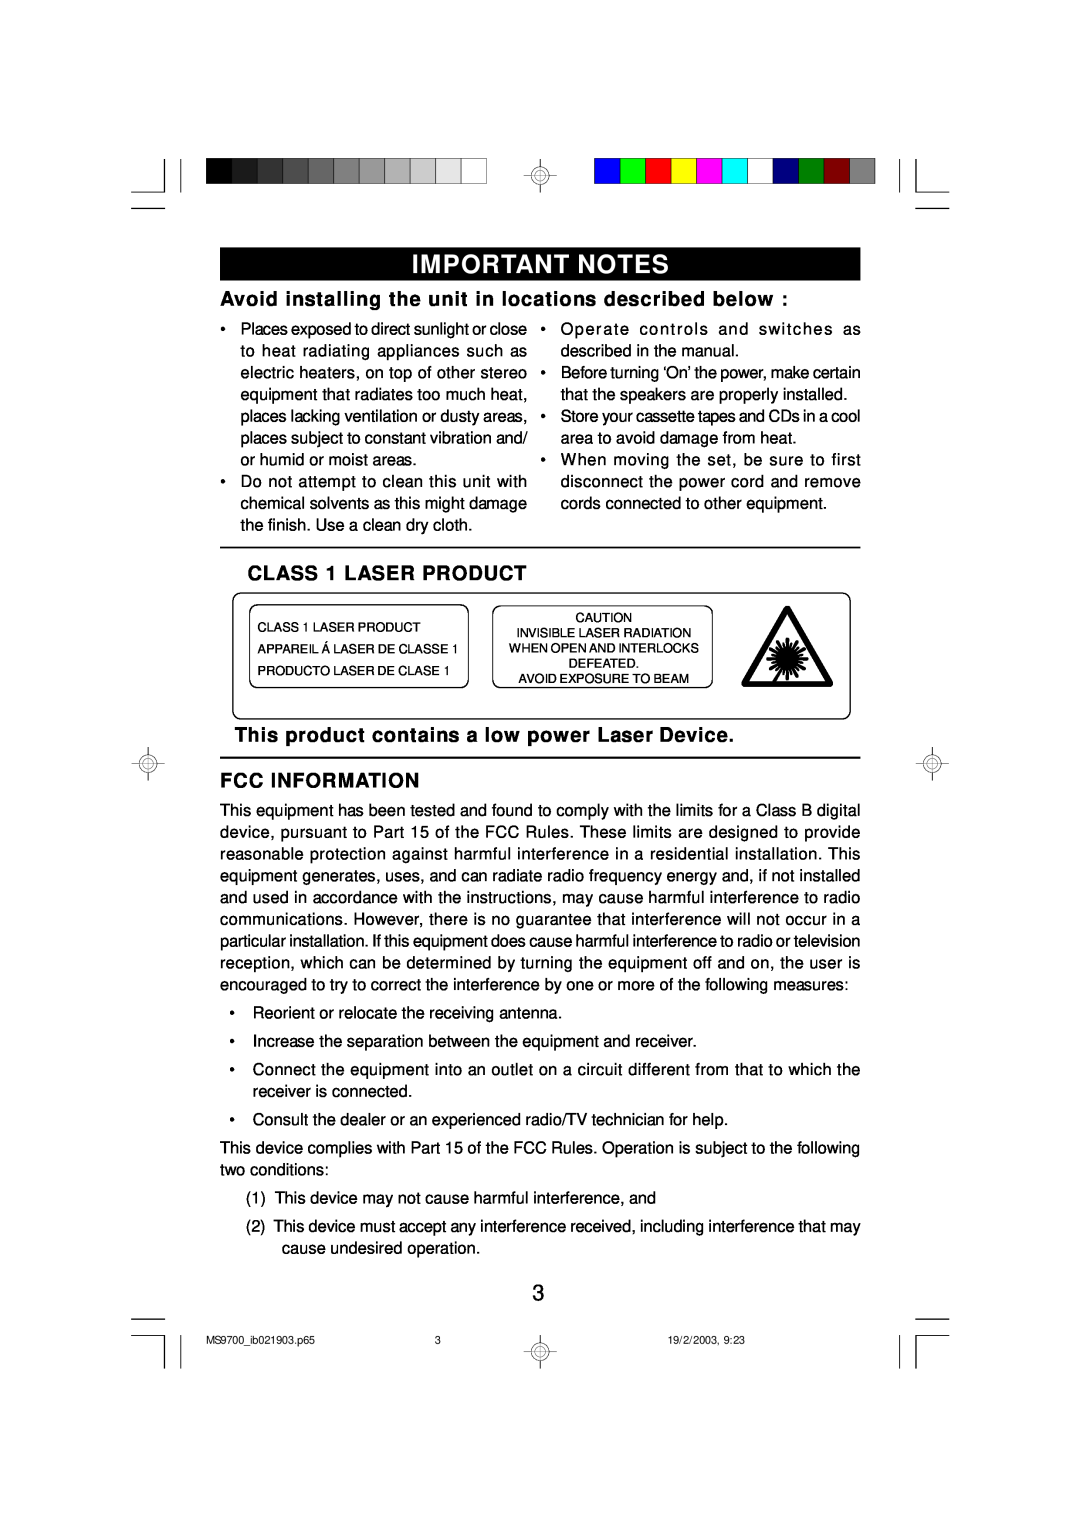 Emerson MS9700 Important Notes, CLASS 1 LASER PRODUCT, This product contains a low power Laser Device, Fcc Information 